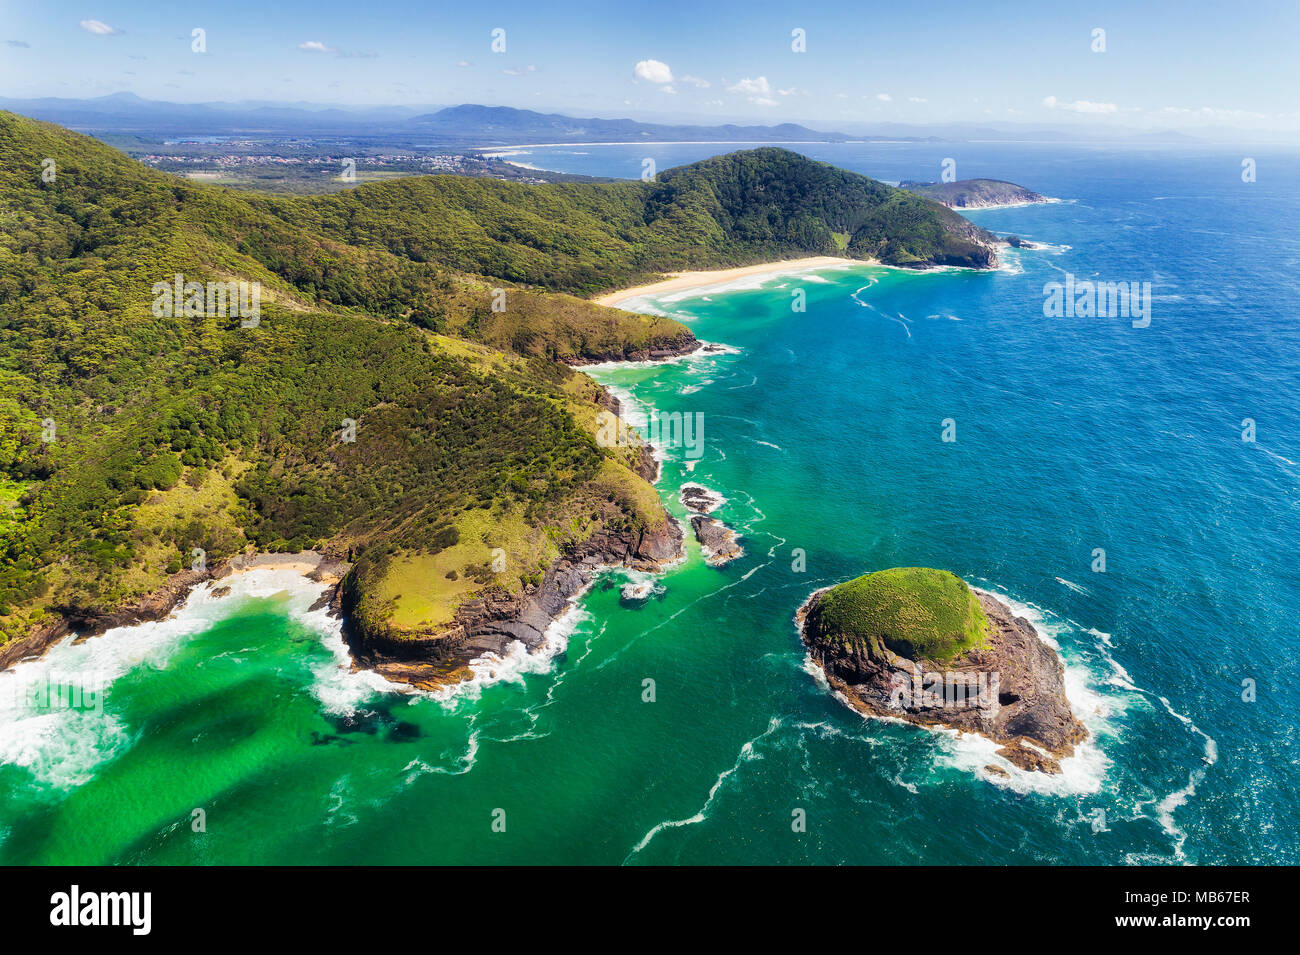 Scenic aerial view of colourful Australian pacific coast off Arakoon national park with tall hills cutting down to cliffy shore and beaches. Stock Photo